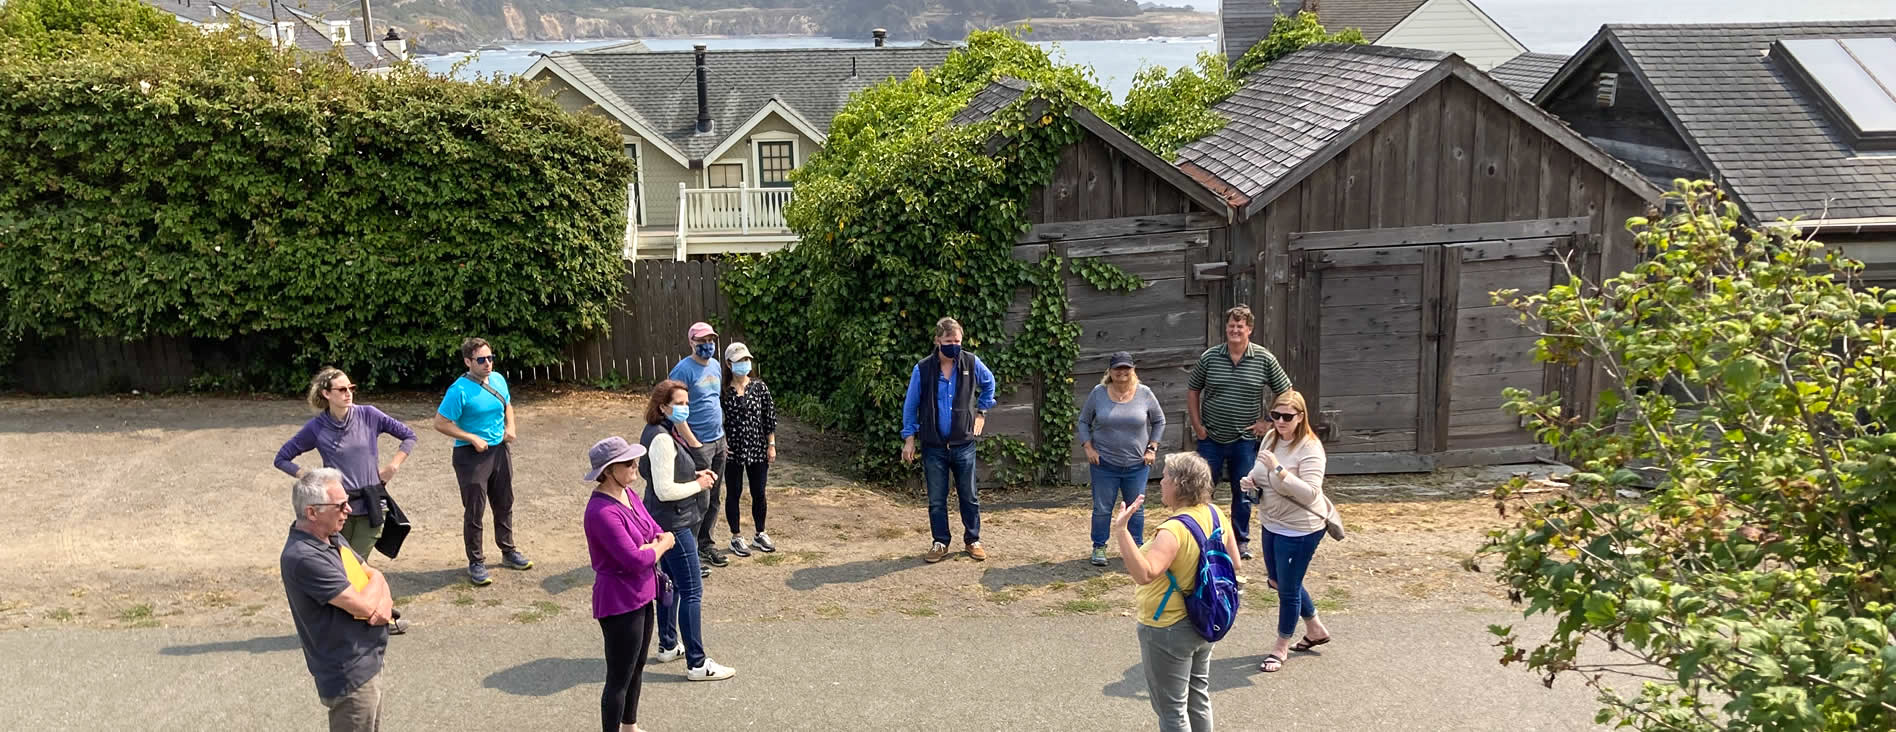 mendocino historic district walking tour - small group listening to leader